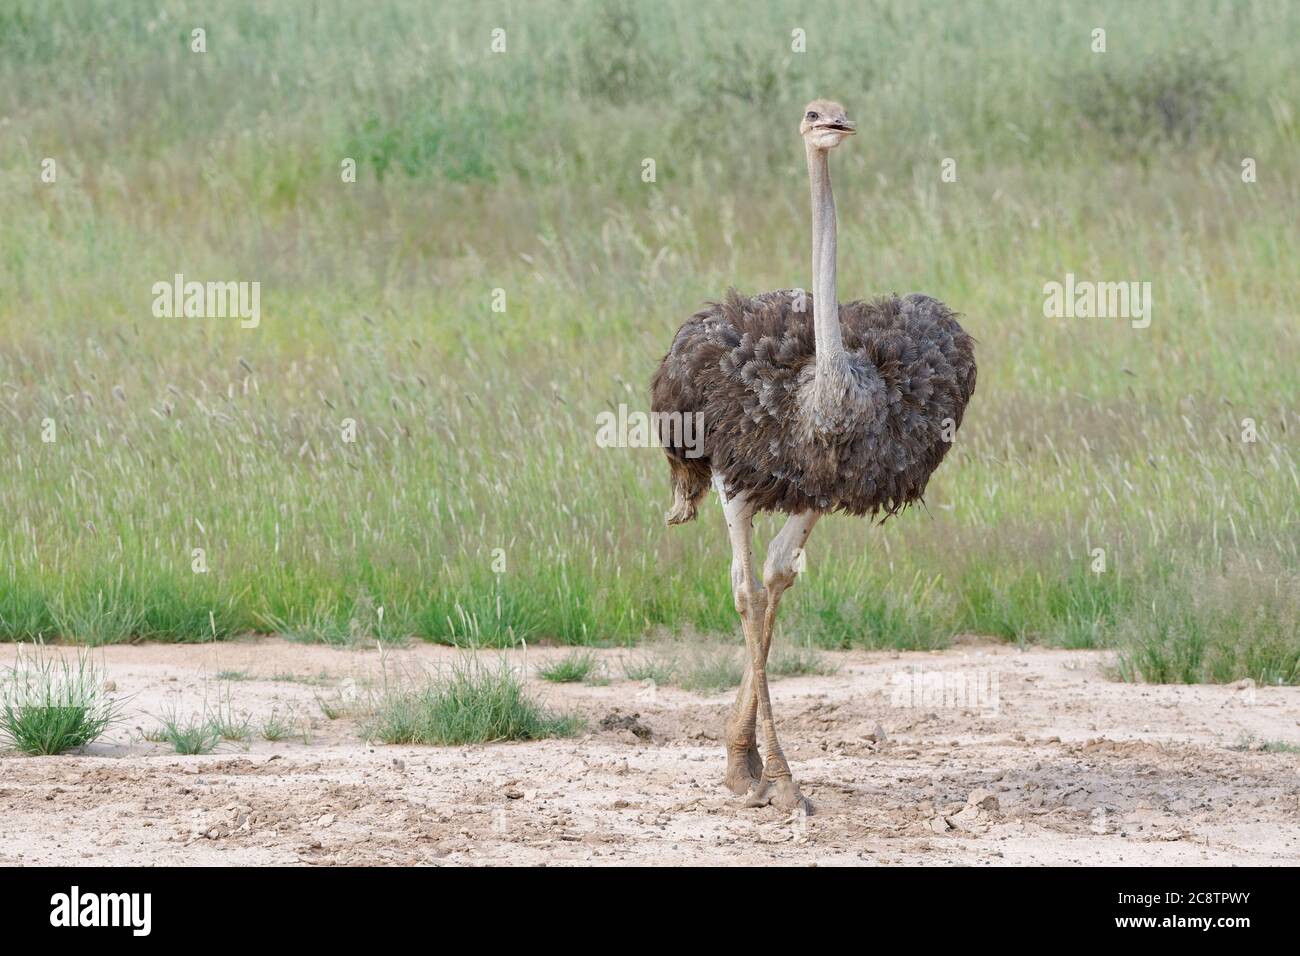 Common ostrich (Struthio camelus), adult female, walking from the waterhole, Kgalagadi Transfrontier Park, Northern Cape, South Africa, Africa Stock Photo